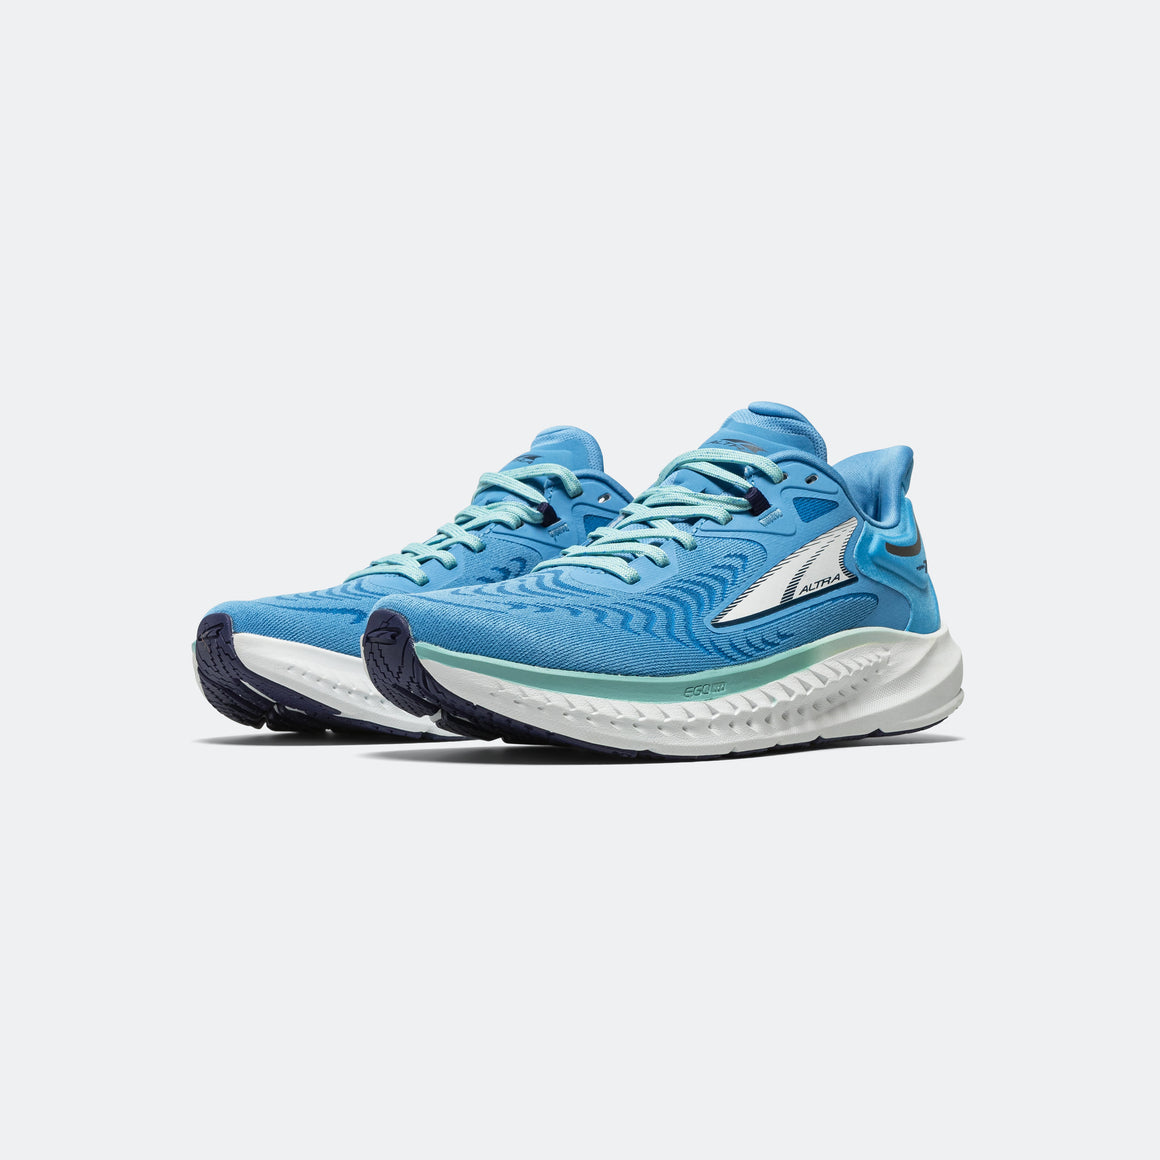 Altra - Womens Torin 7 - Blue - Up There Athletics